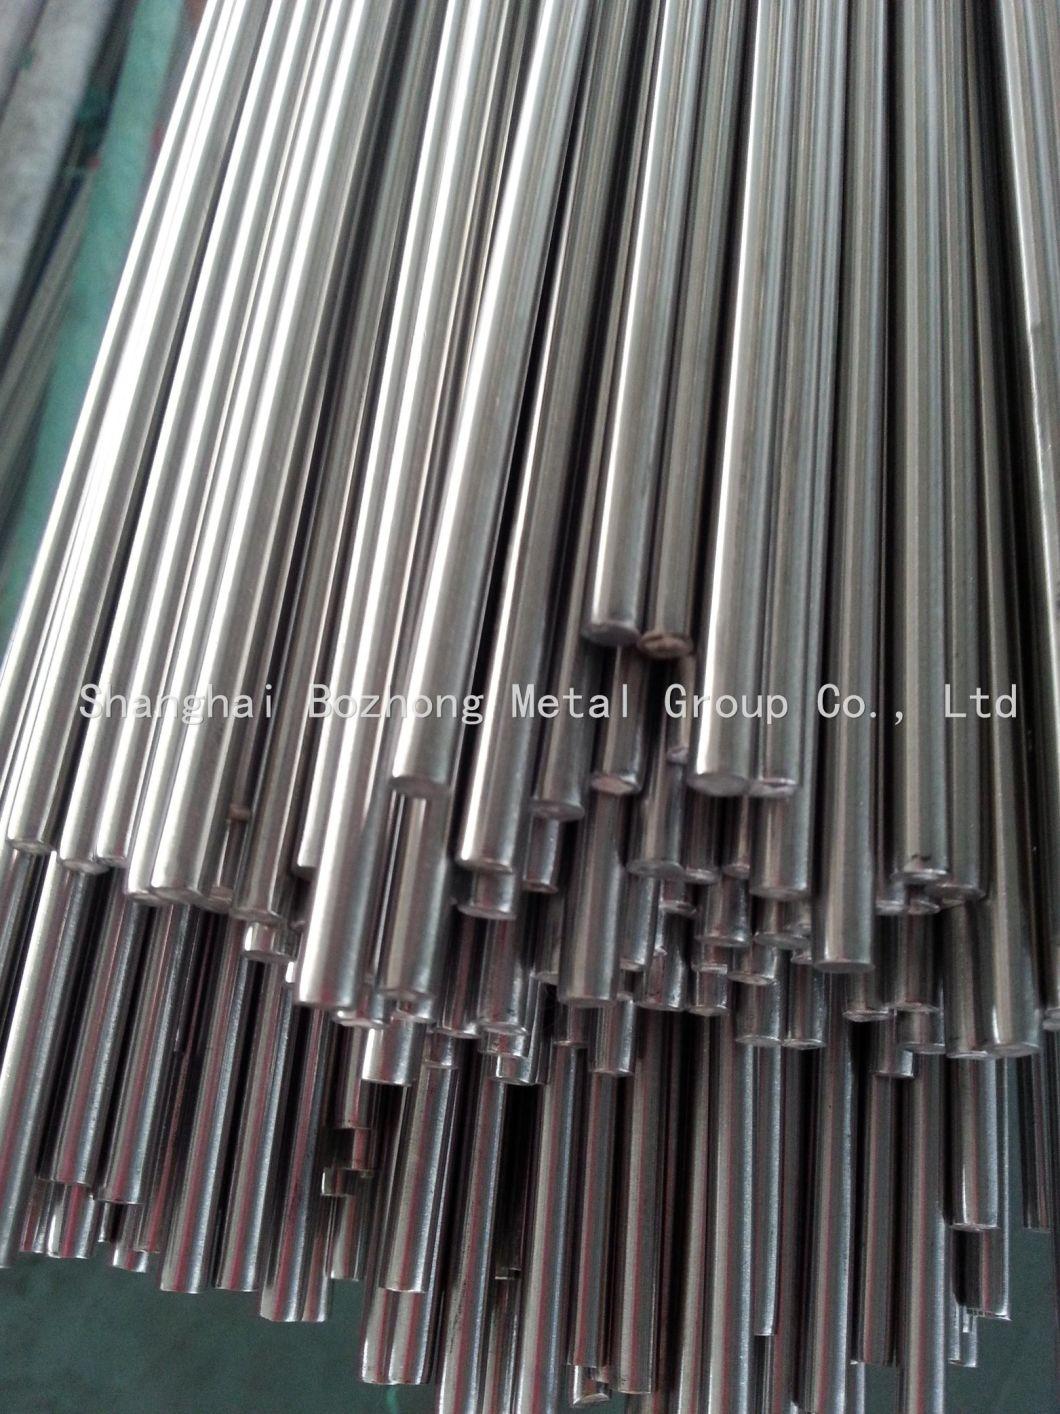 Alloy 718/Haynes 718 Solid Rod Stainless Steel Bar